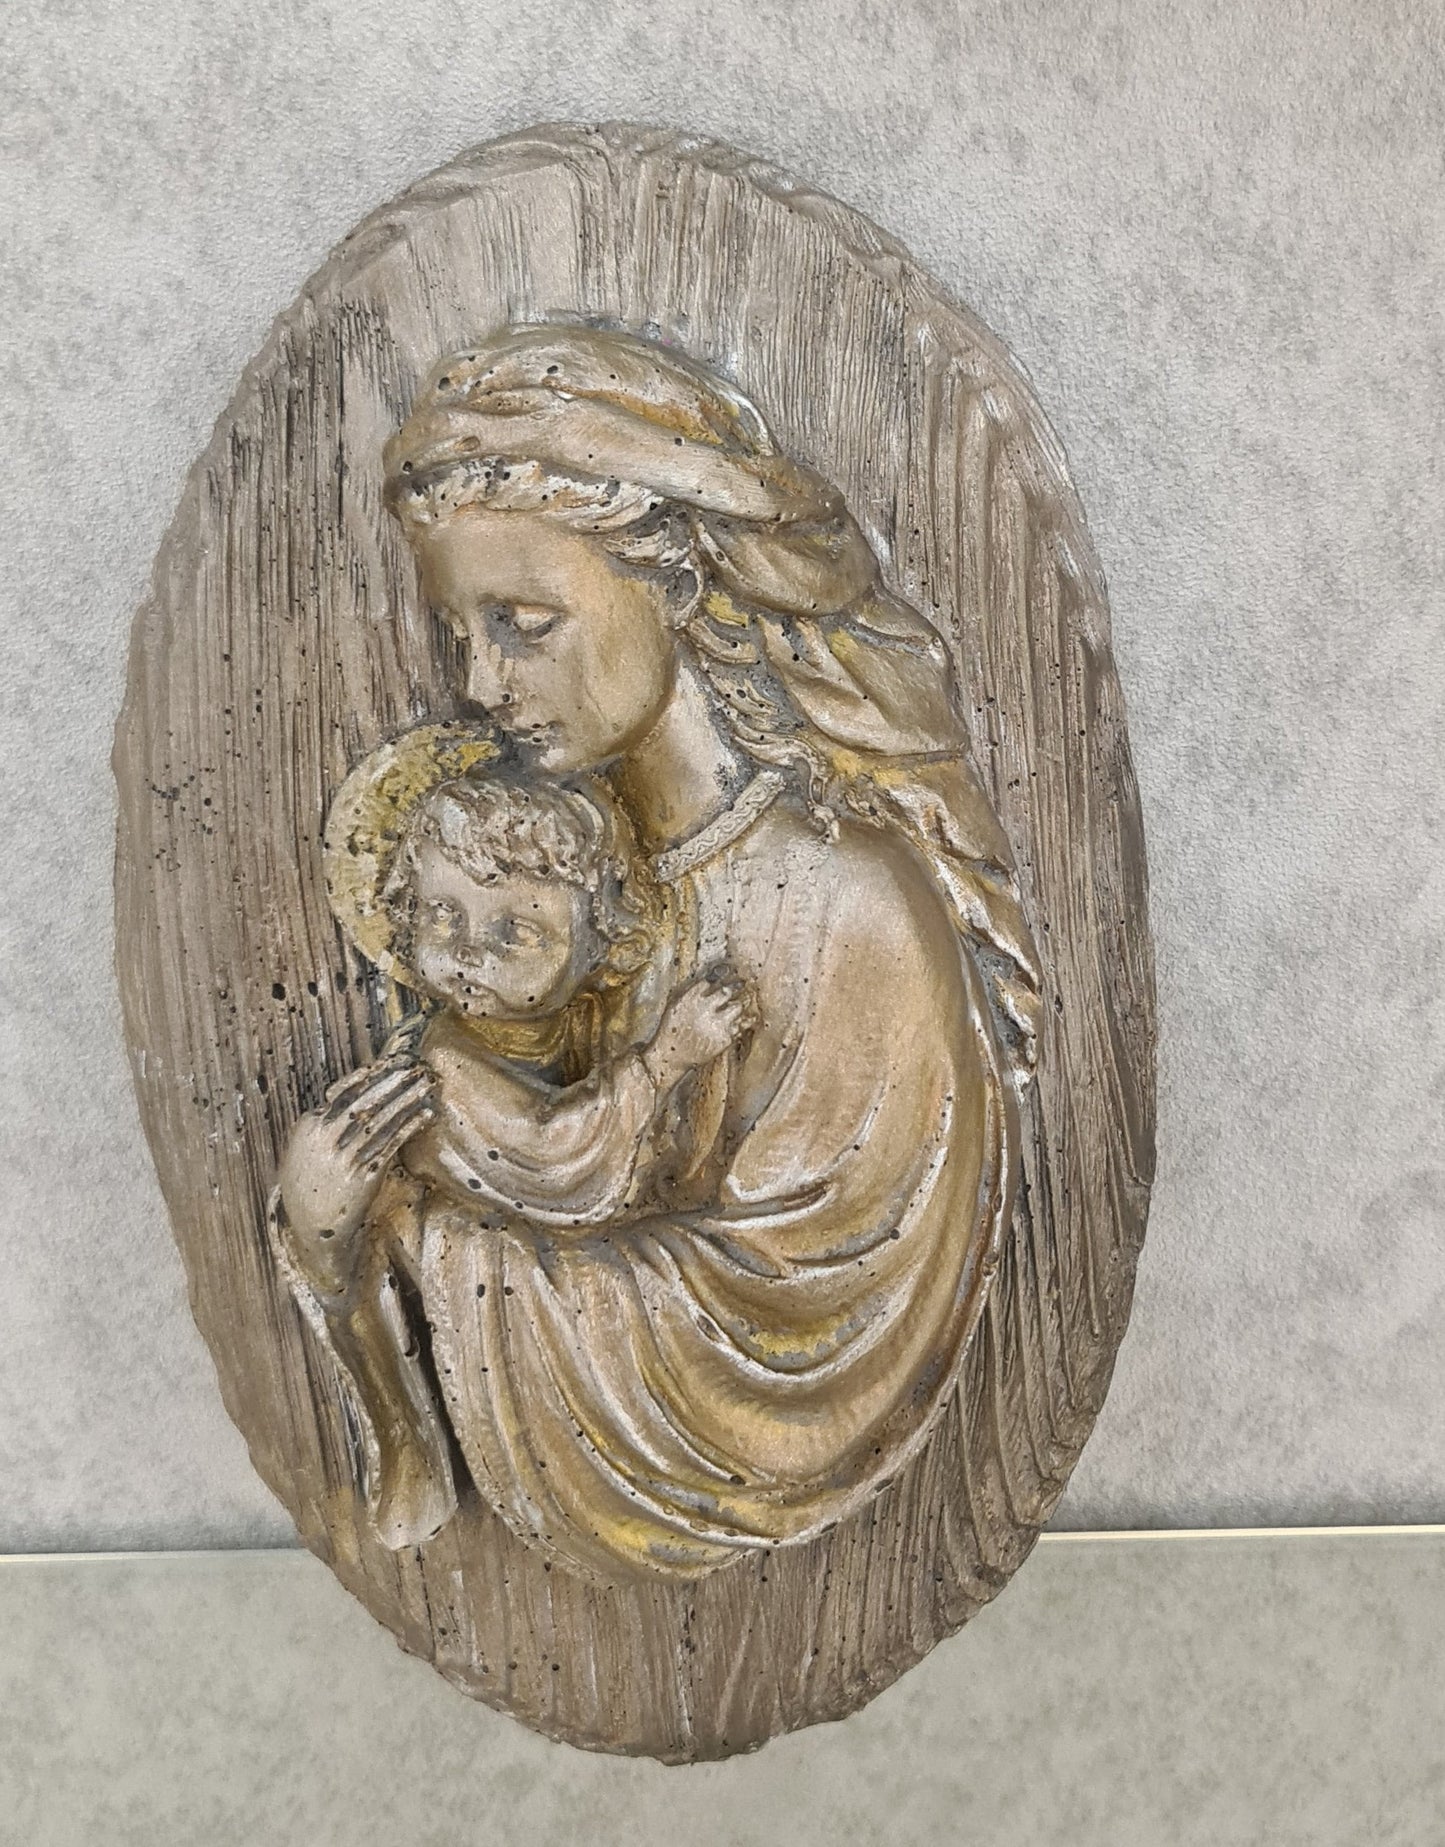 Heavenly Embrace - St. Mary with Jesus Christ figurine in eco-friendly black jesmonite by Candle Gnome.